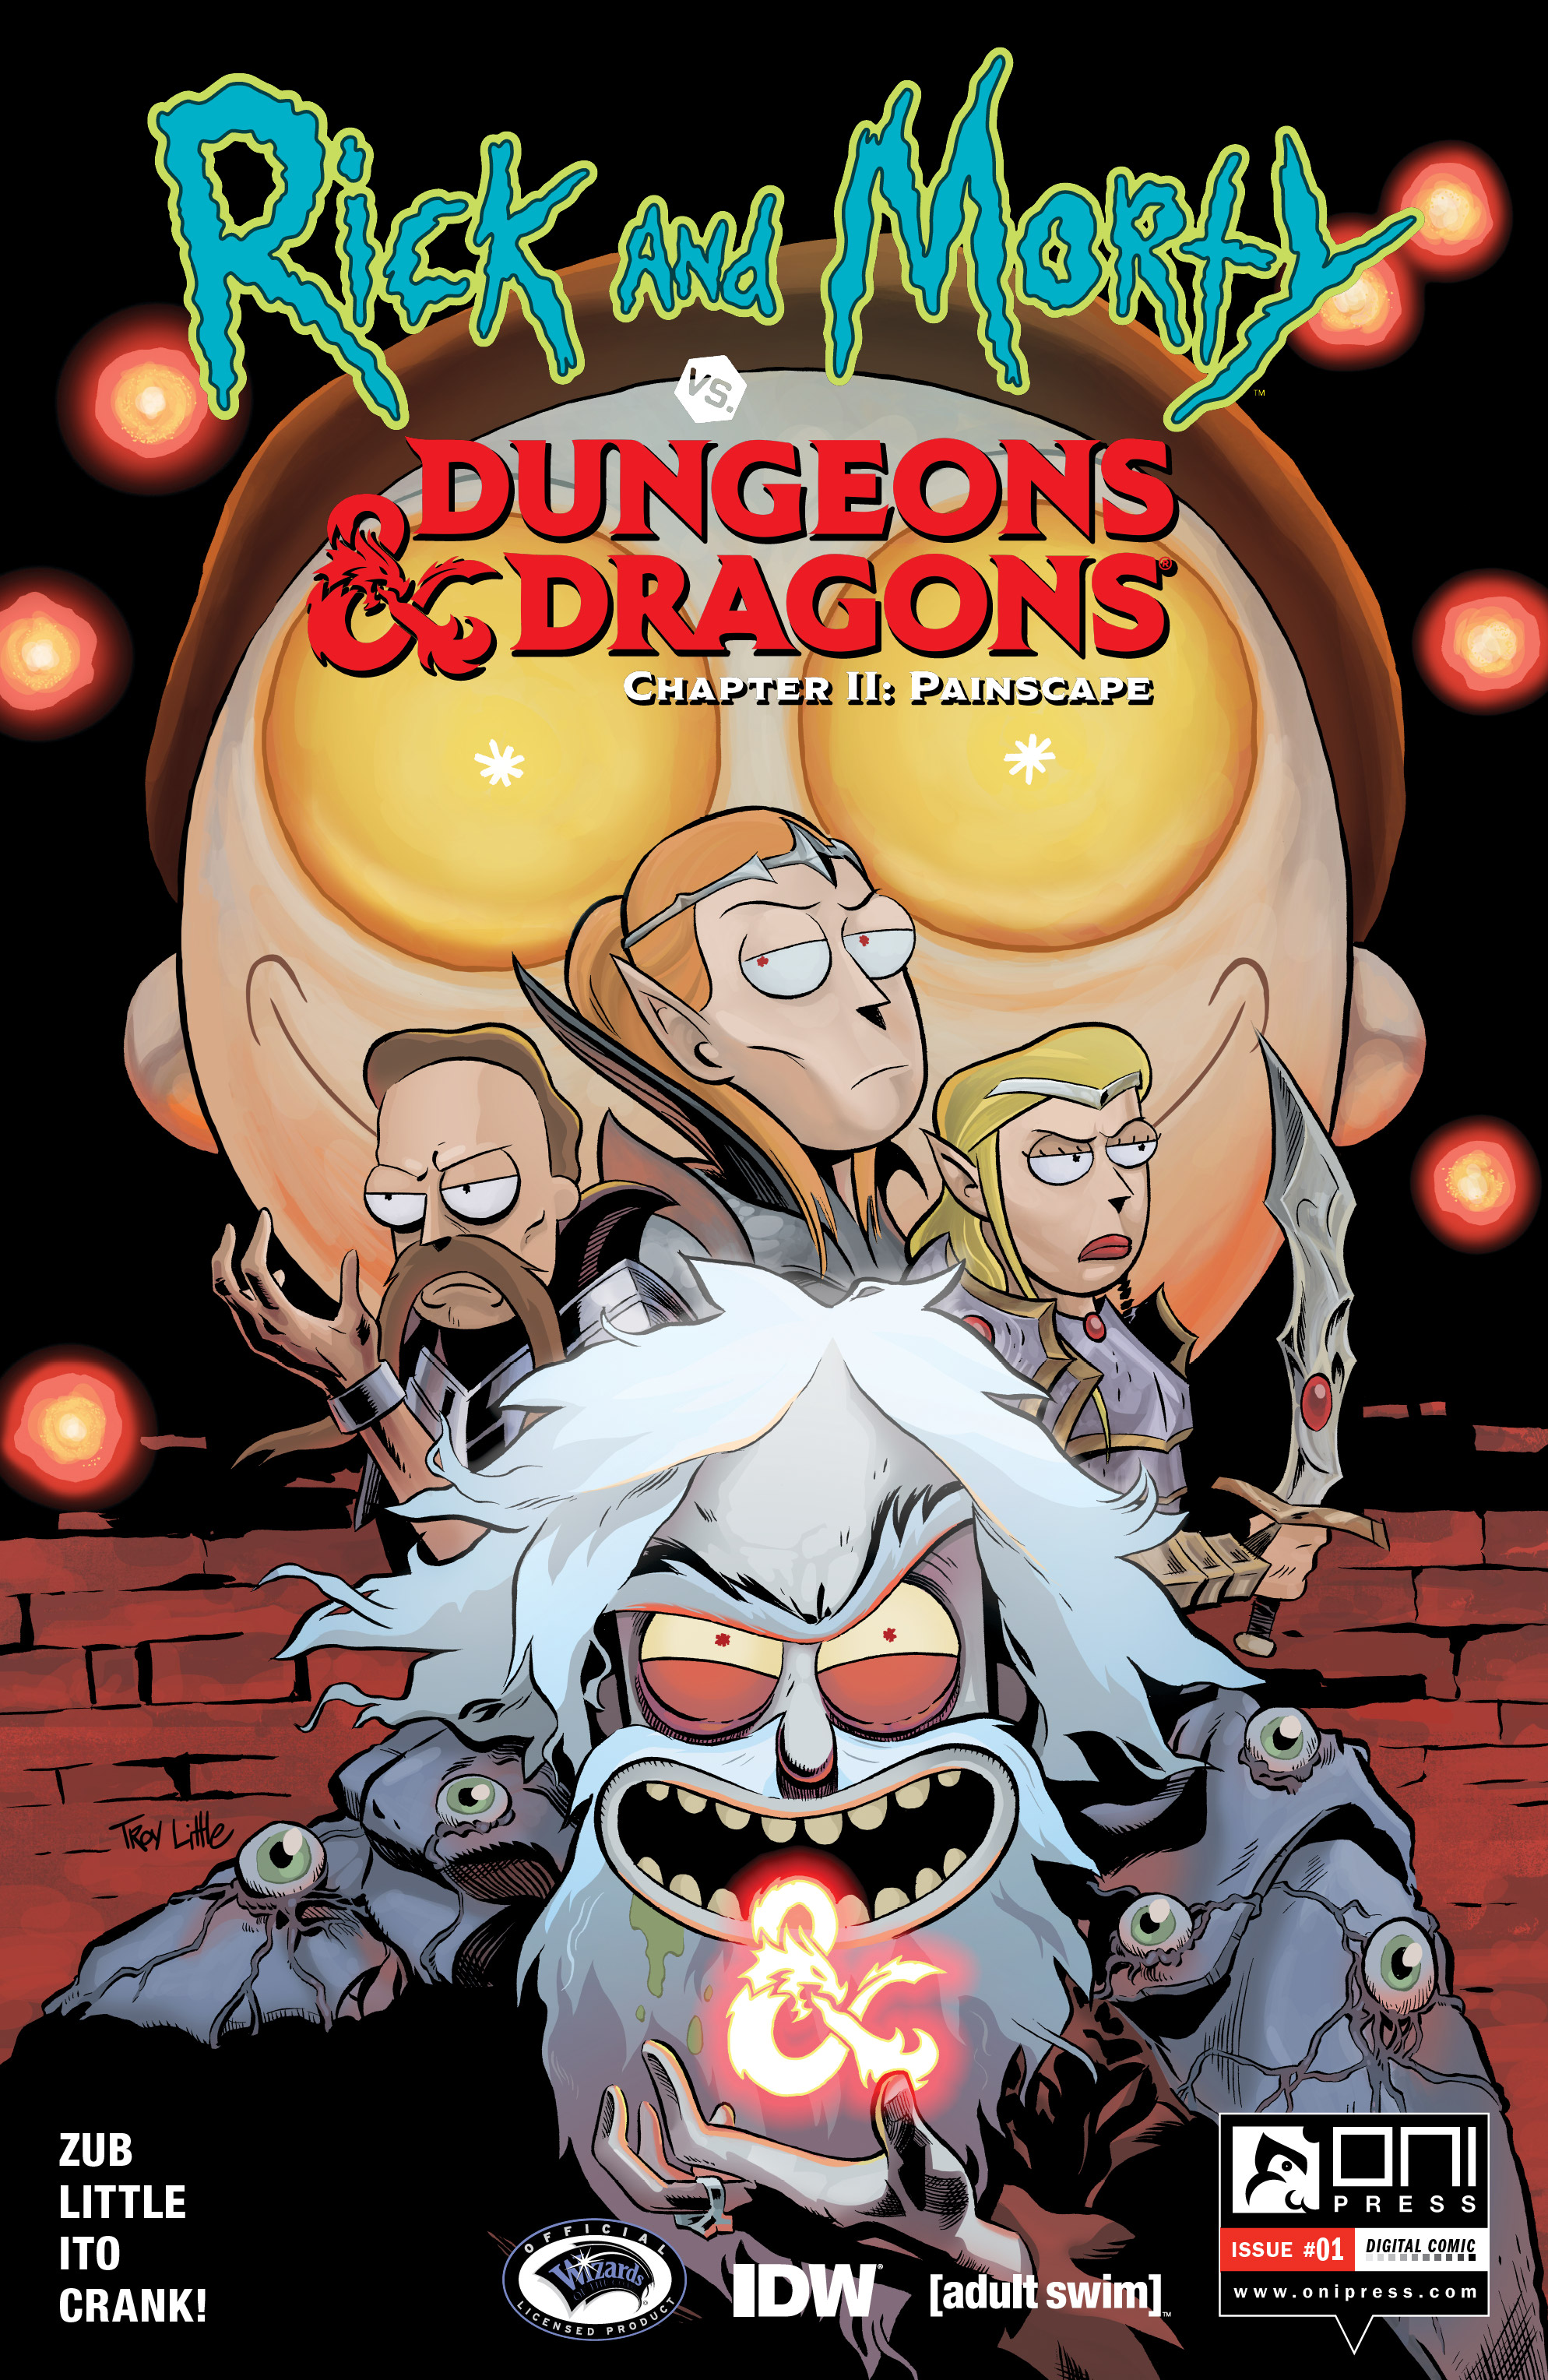 Read online Rick and Morty vs. Dungeons & Dragons II: Painscape comic -  Issue #1 - 1